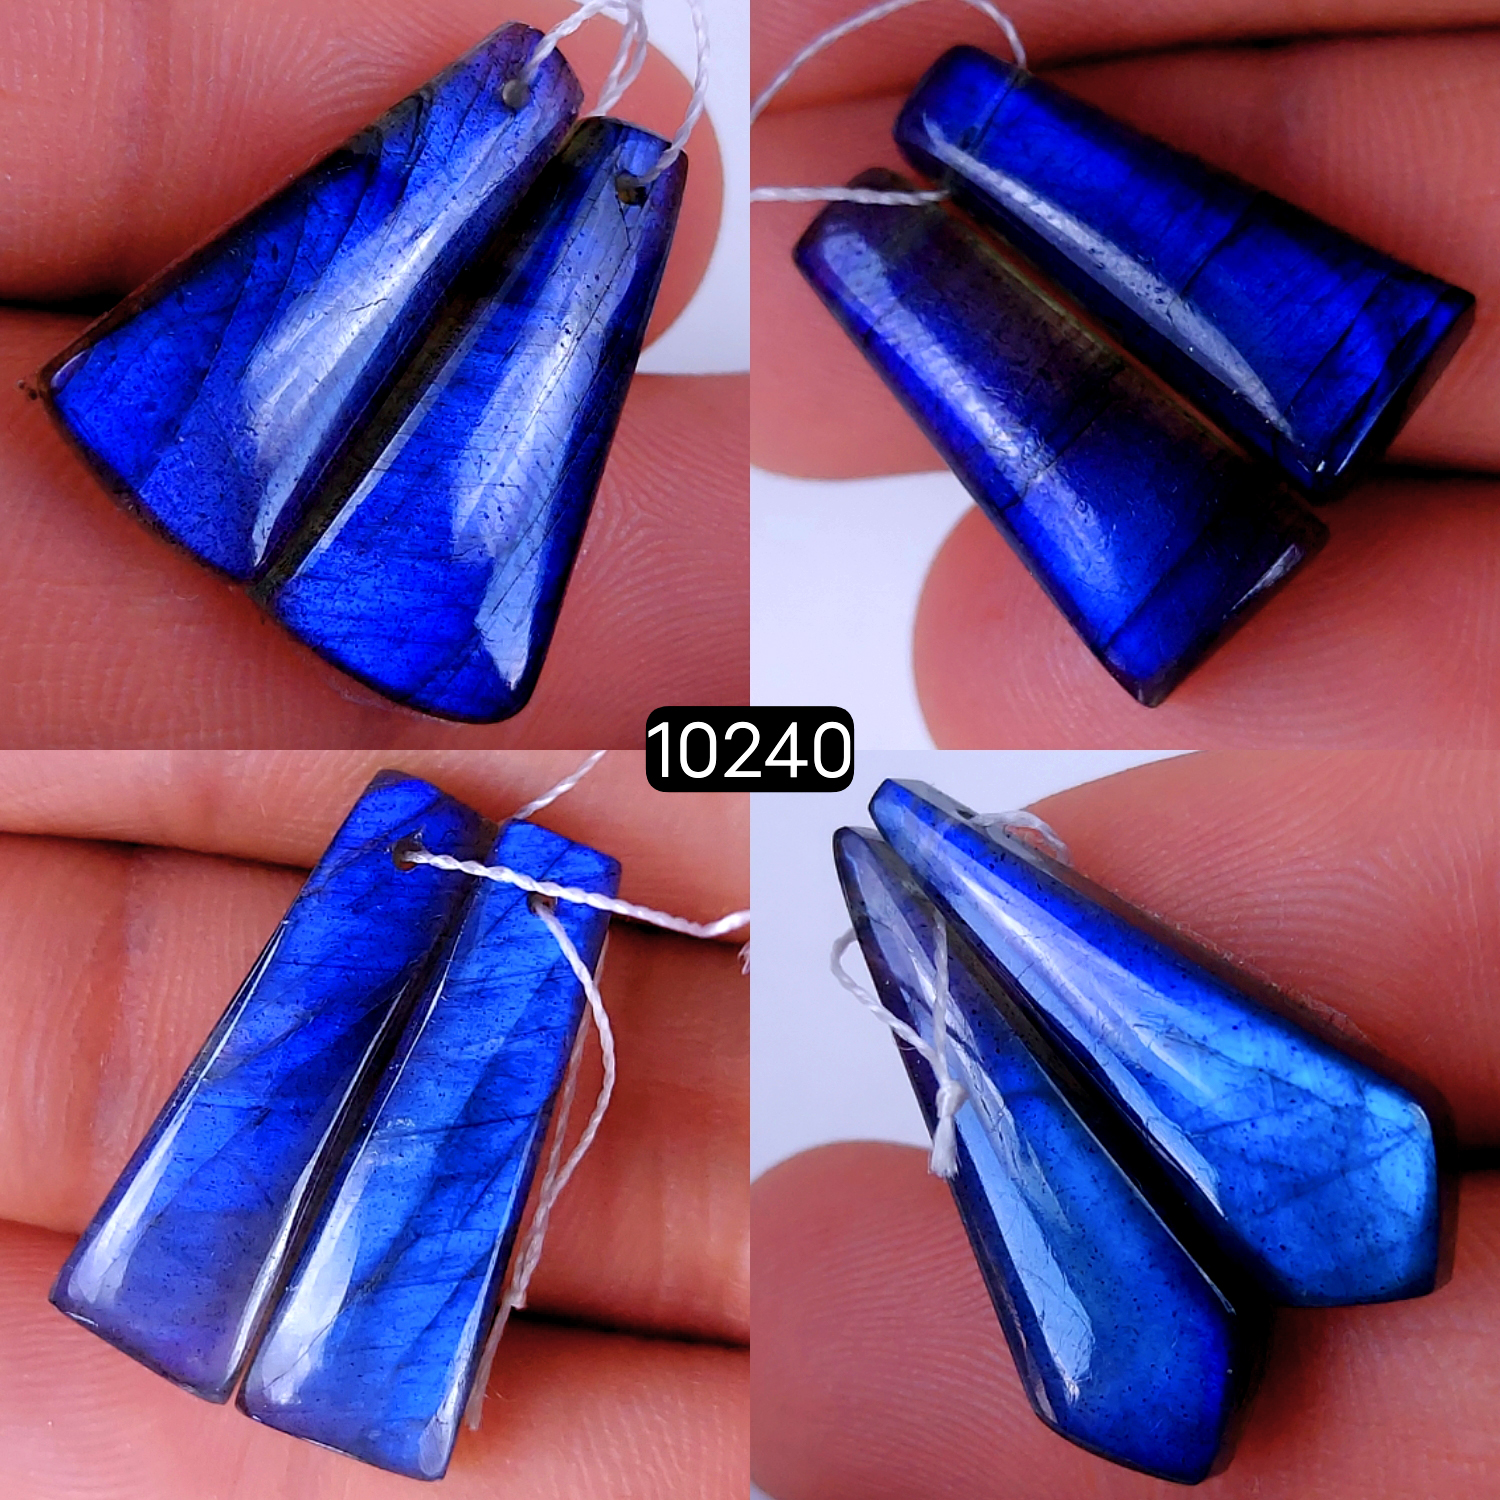 4Pair 72Cts Natural Labradorite Crystal Drill Dangle Drop Earring Pairs Silver Earrings Blue Labradorite Hoop Jewelry  26x9 20x9mm #10240